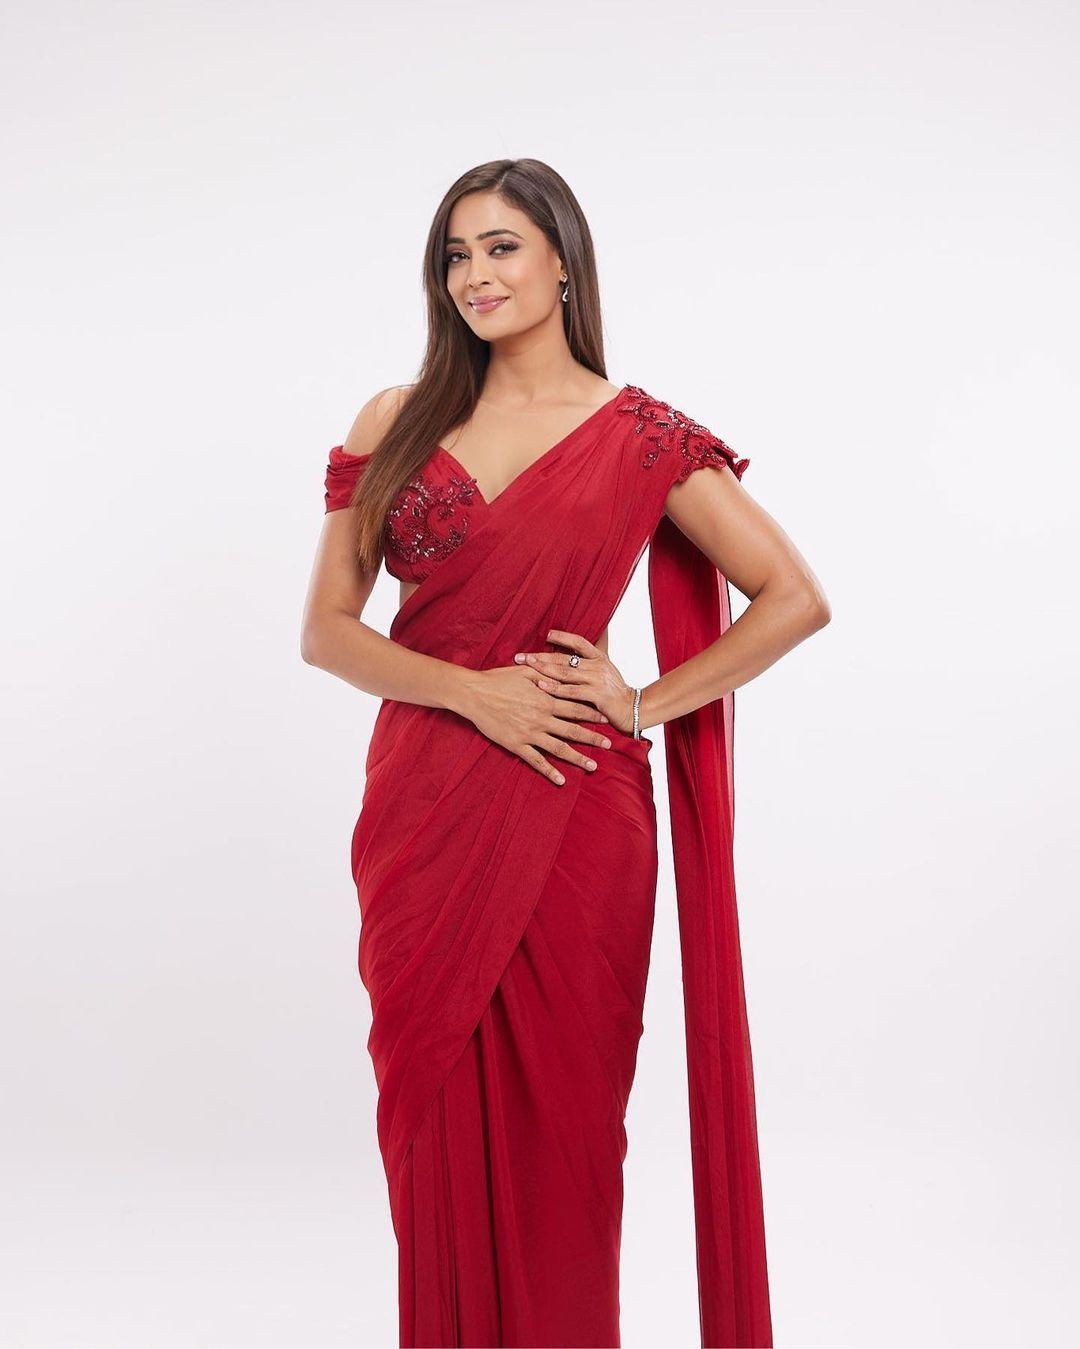 Shweta Tiwari looked absolutely gorgeous in the elegant red saree. The nude makeup palette she chose accentuated her beauty